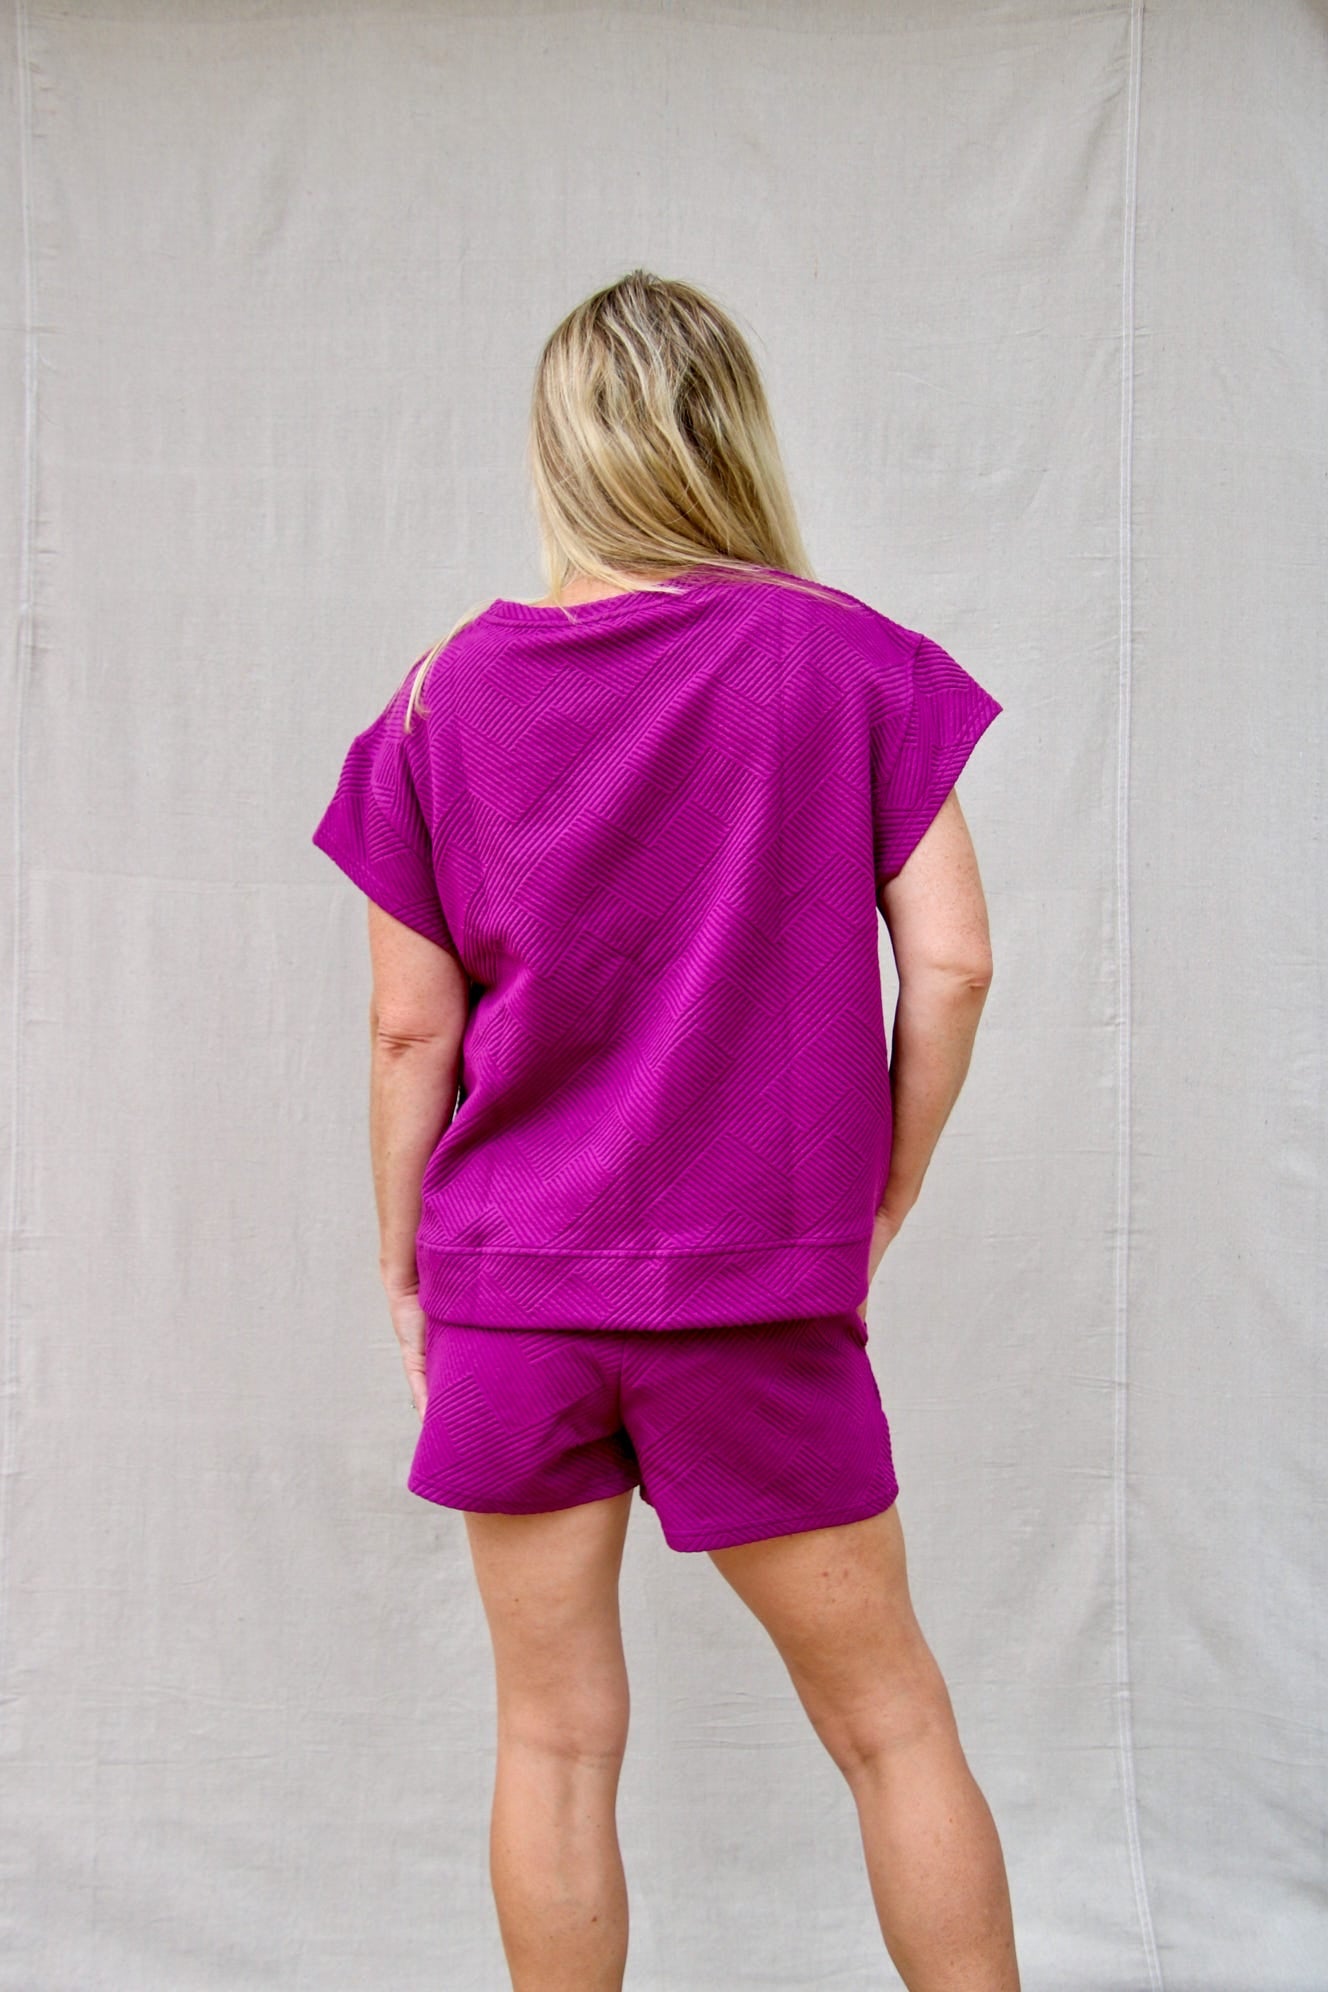 See Clearly Textured Top - Magenta